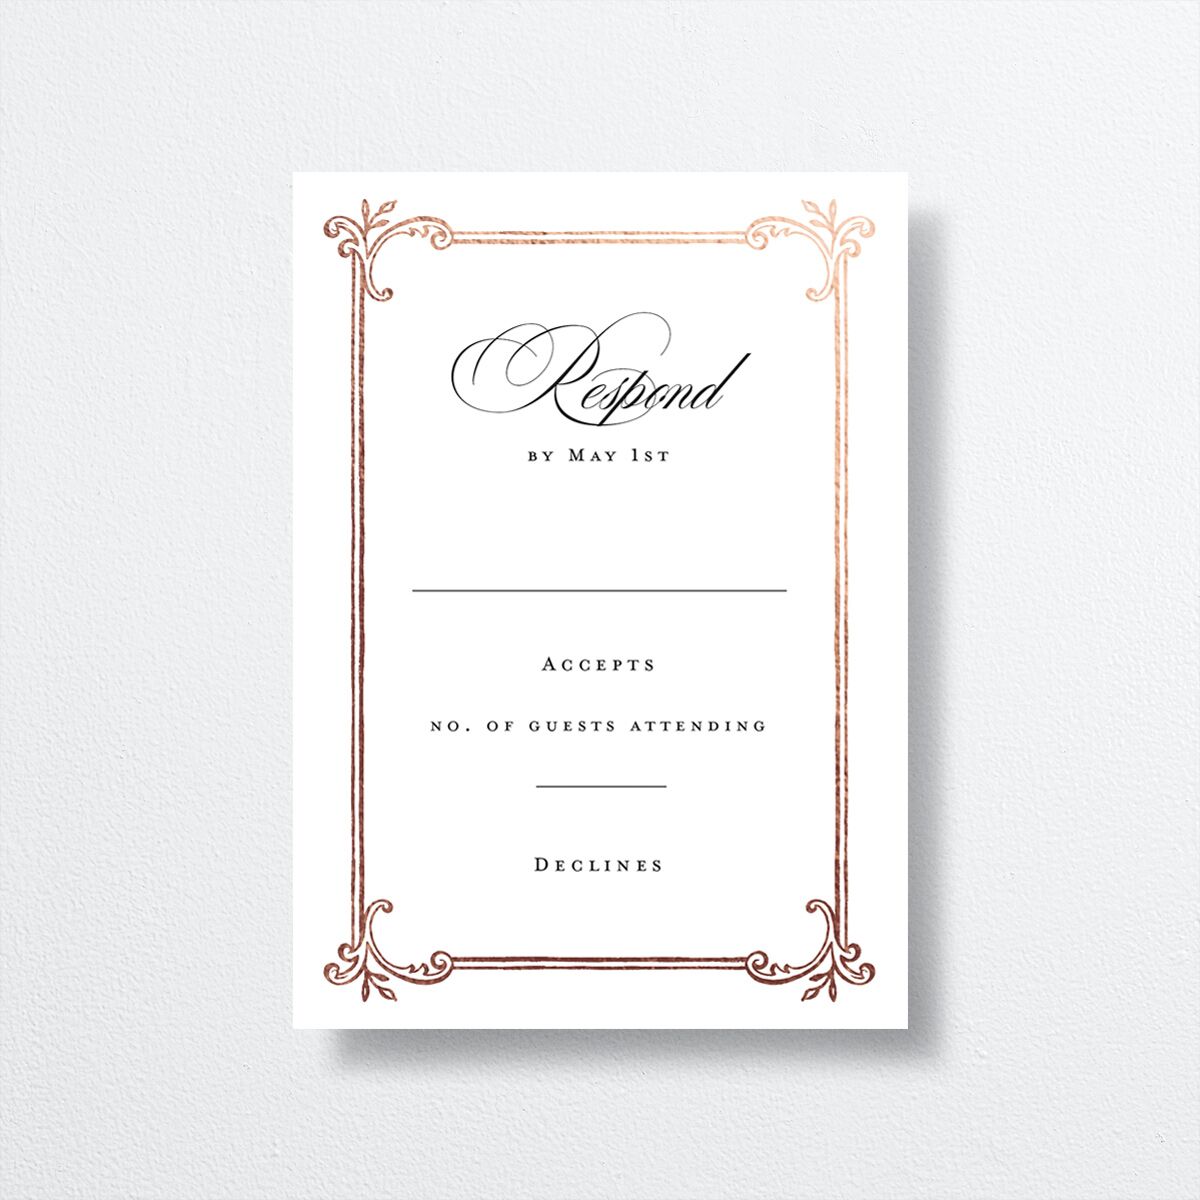 Opulences Wedding Response Cards by Vera Wang front in white